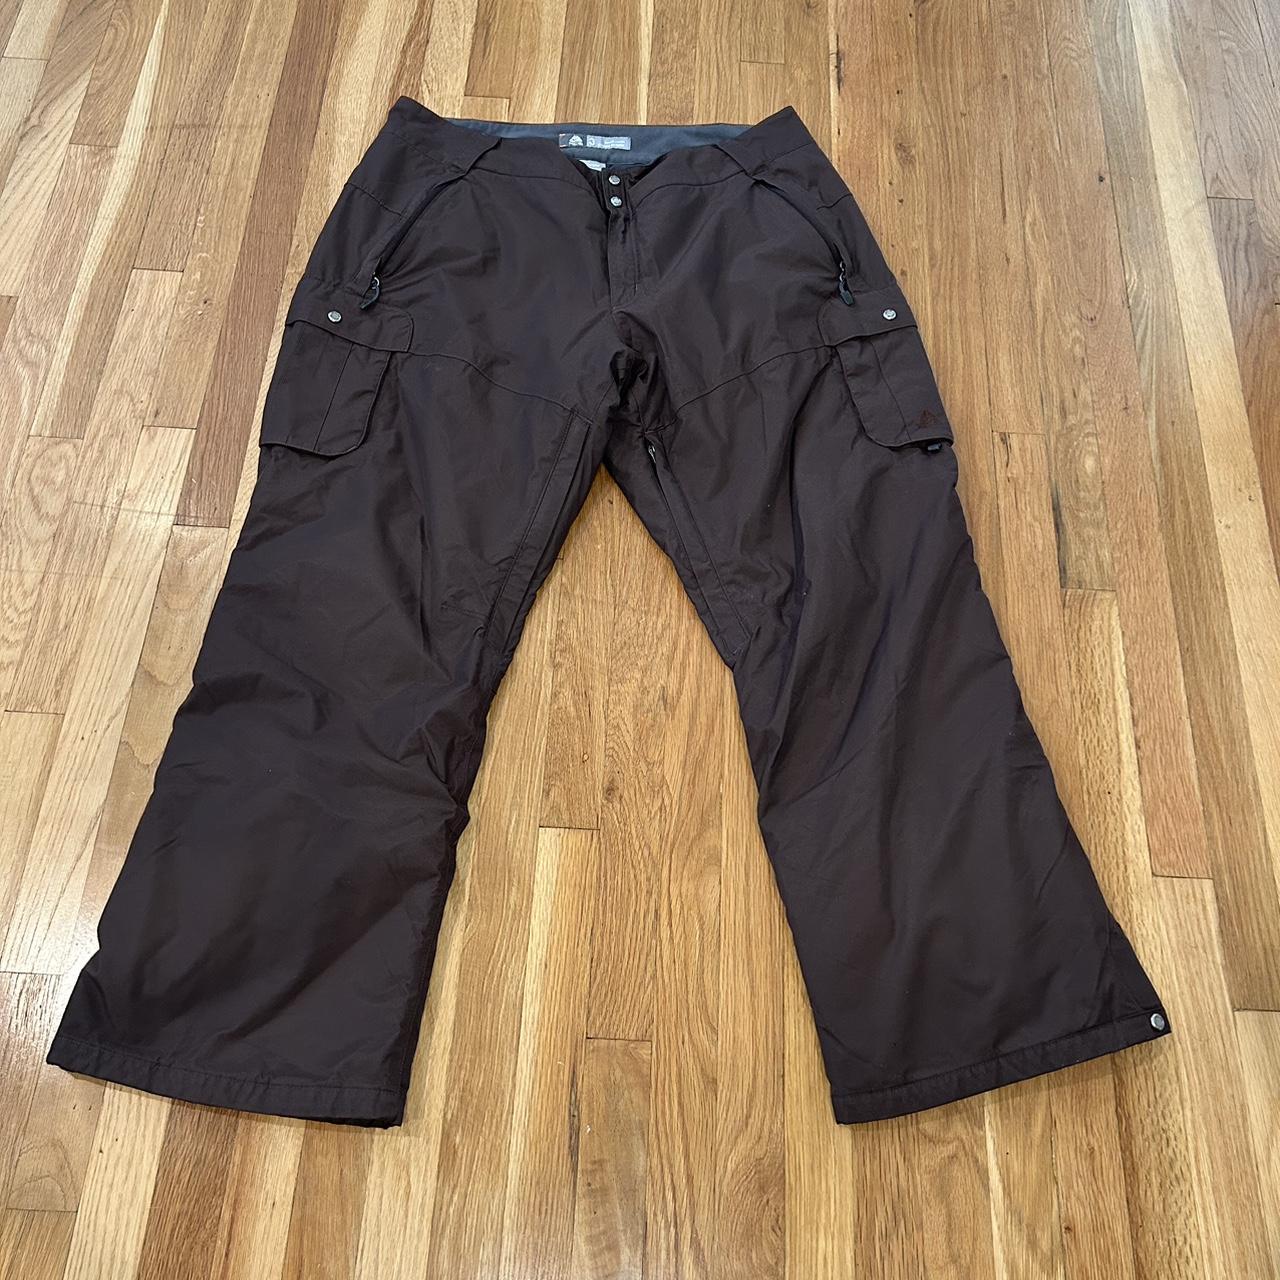 These are Nike ACG SKI PANTS which are slightly used